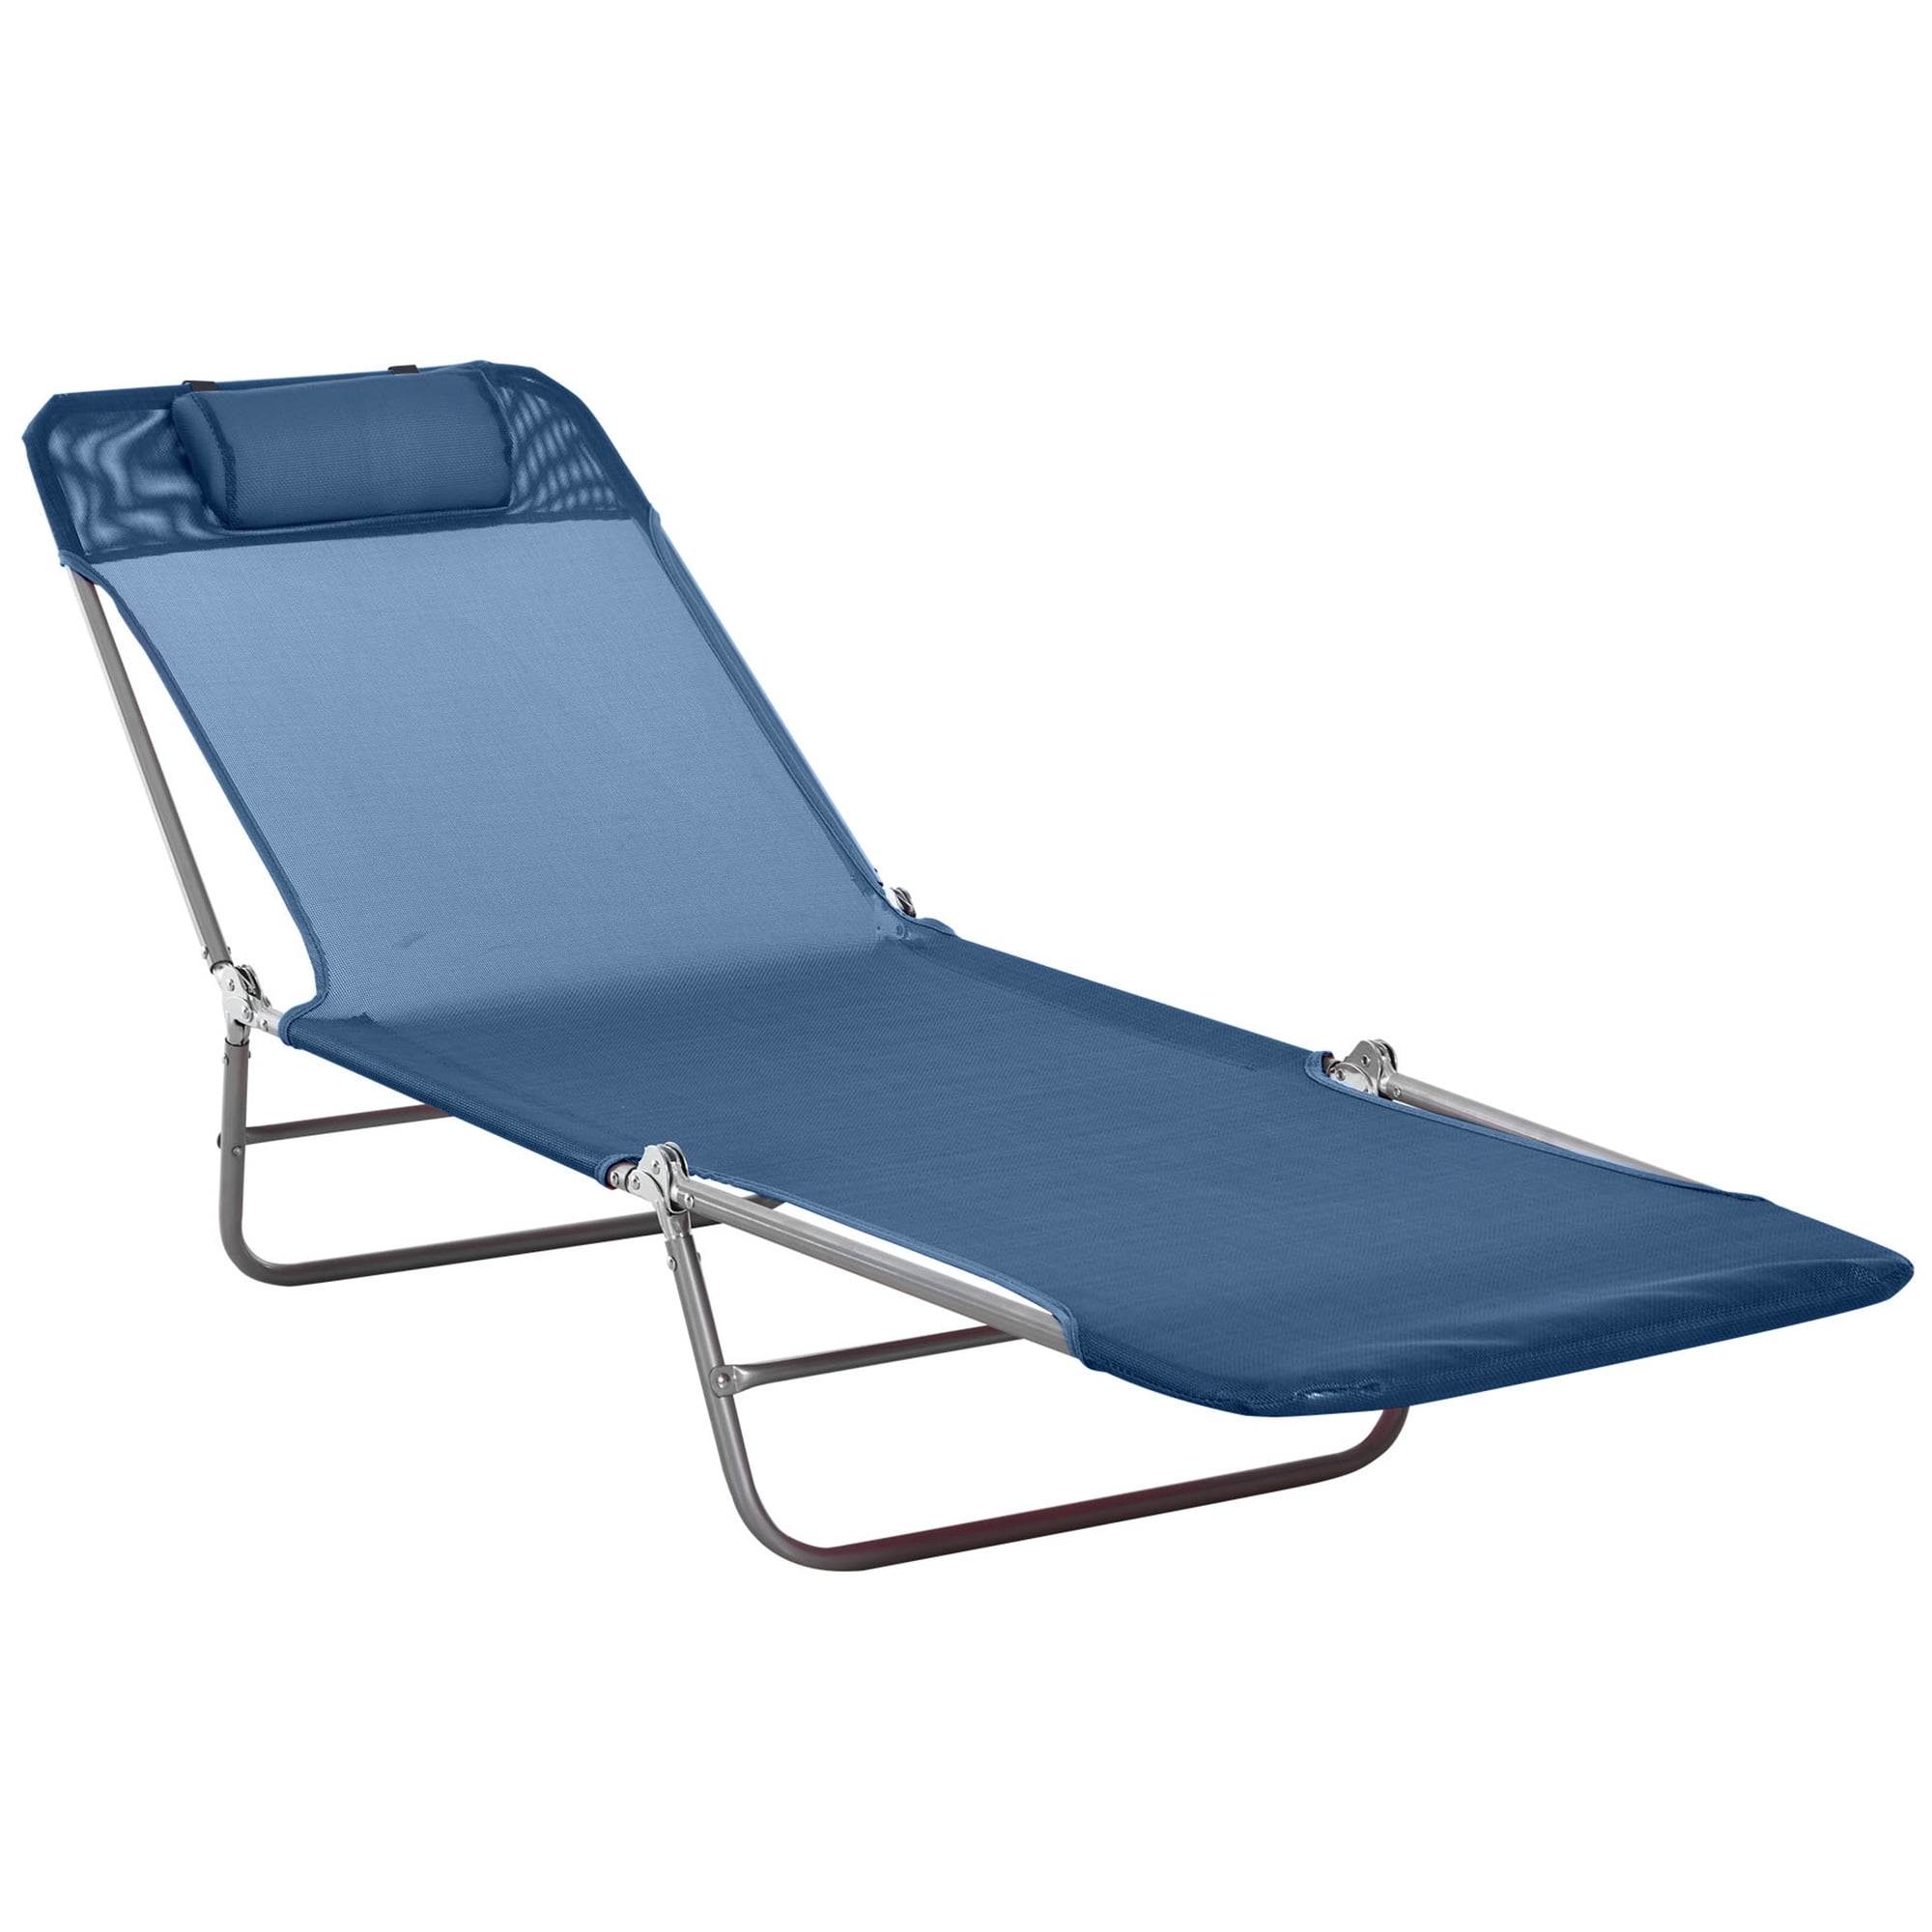 Outsunny Portable Sun Lounger, Lightweight Folding Chaise Lounge Chair ...